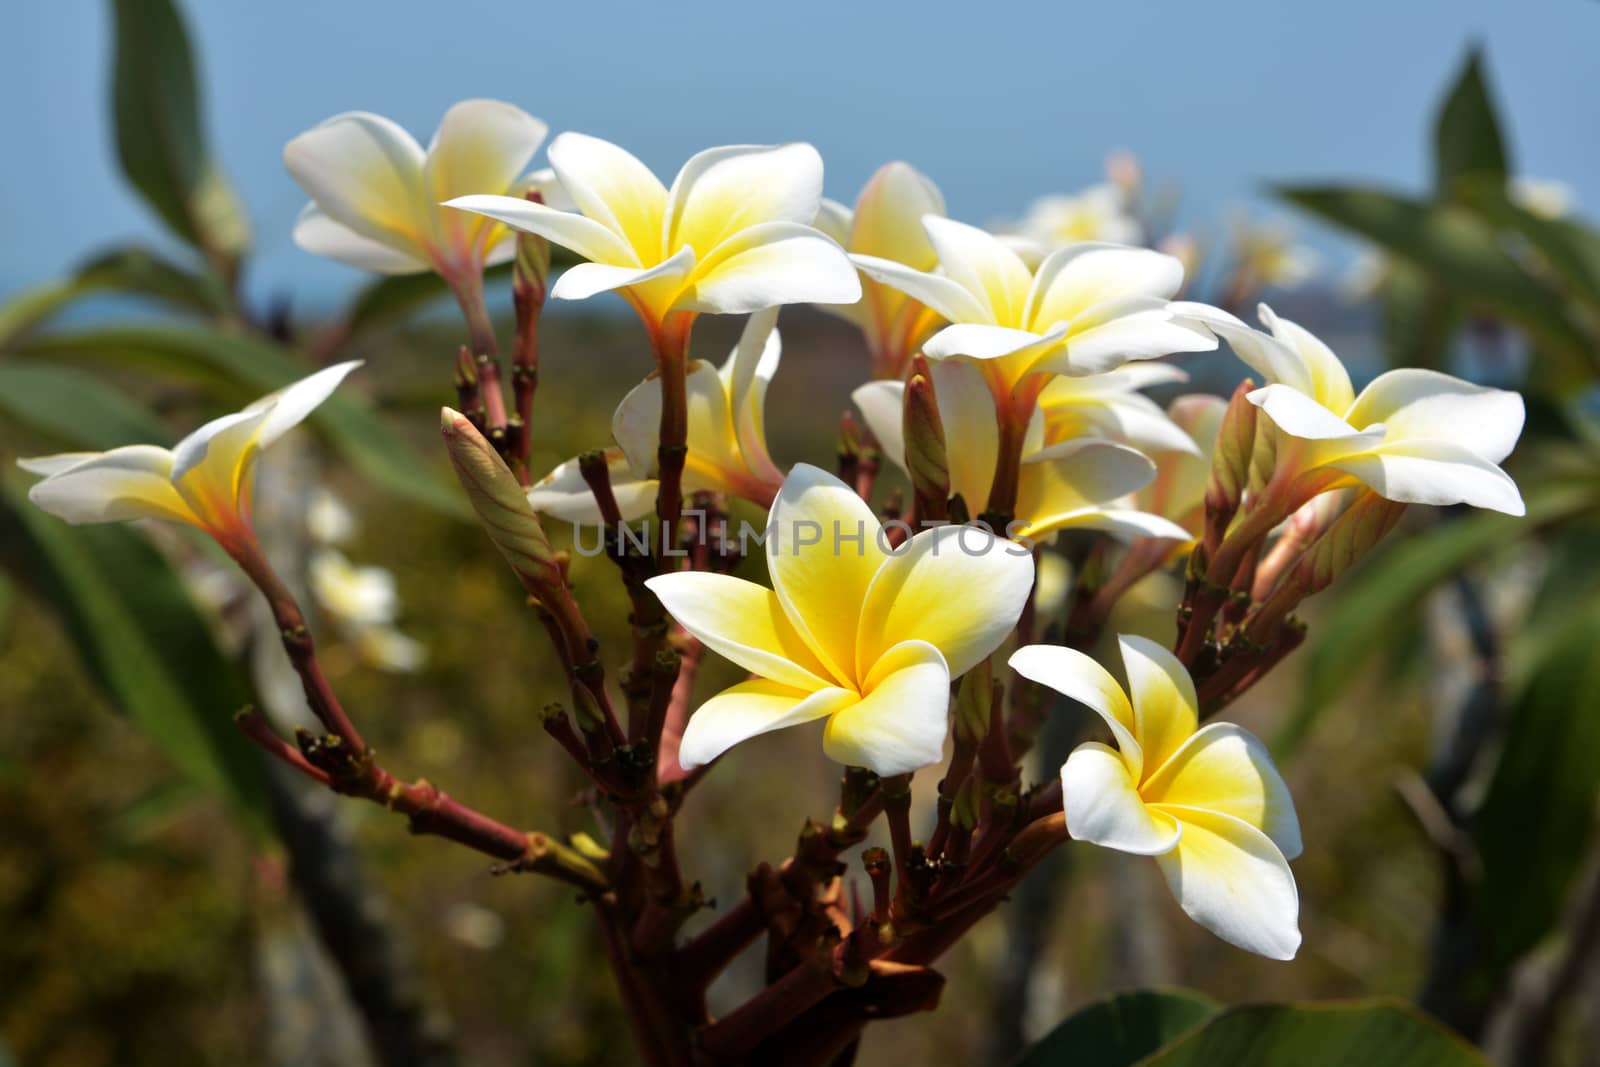 A branch with yellow frangipani flowers by ideation90